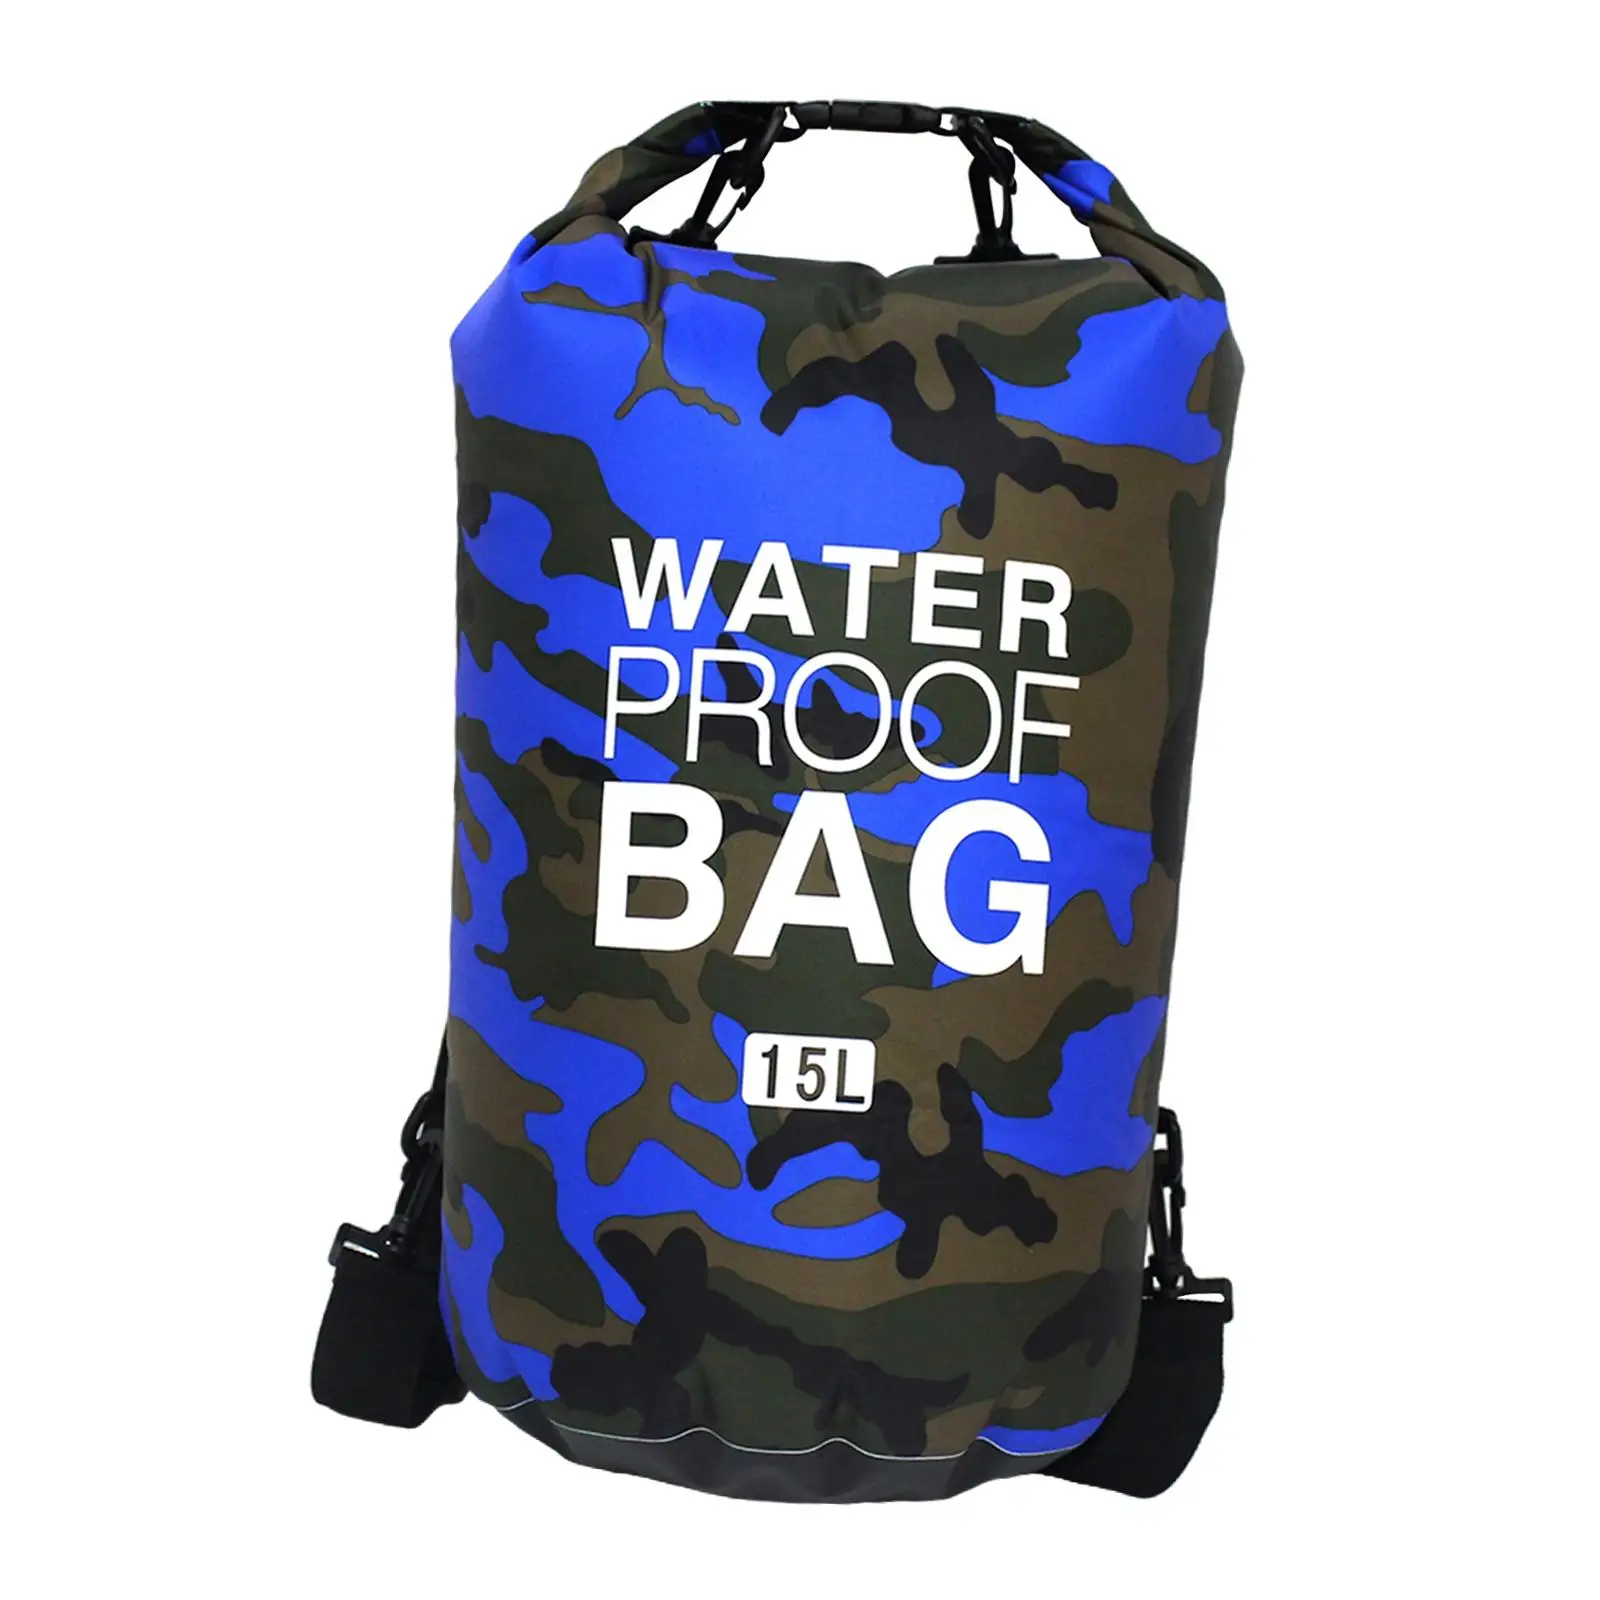 Waterproof Dry Bag Airtight Portable for Camping Hiking Outdoors